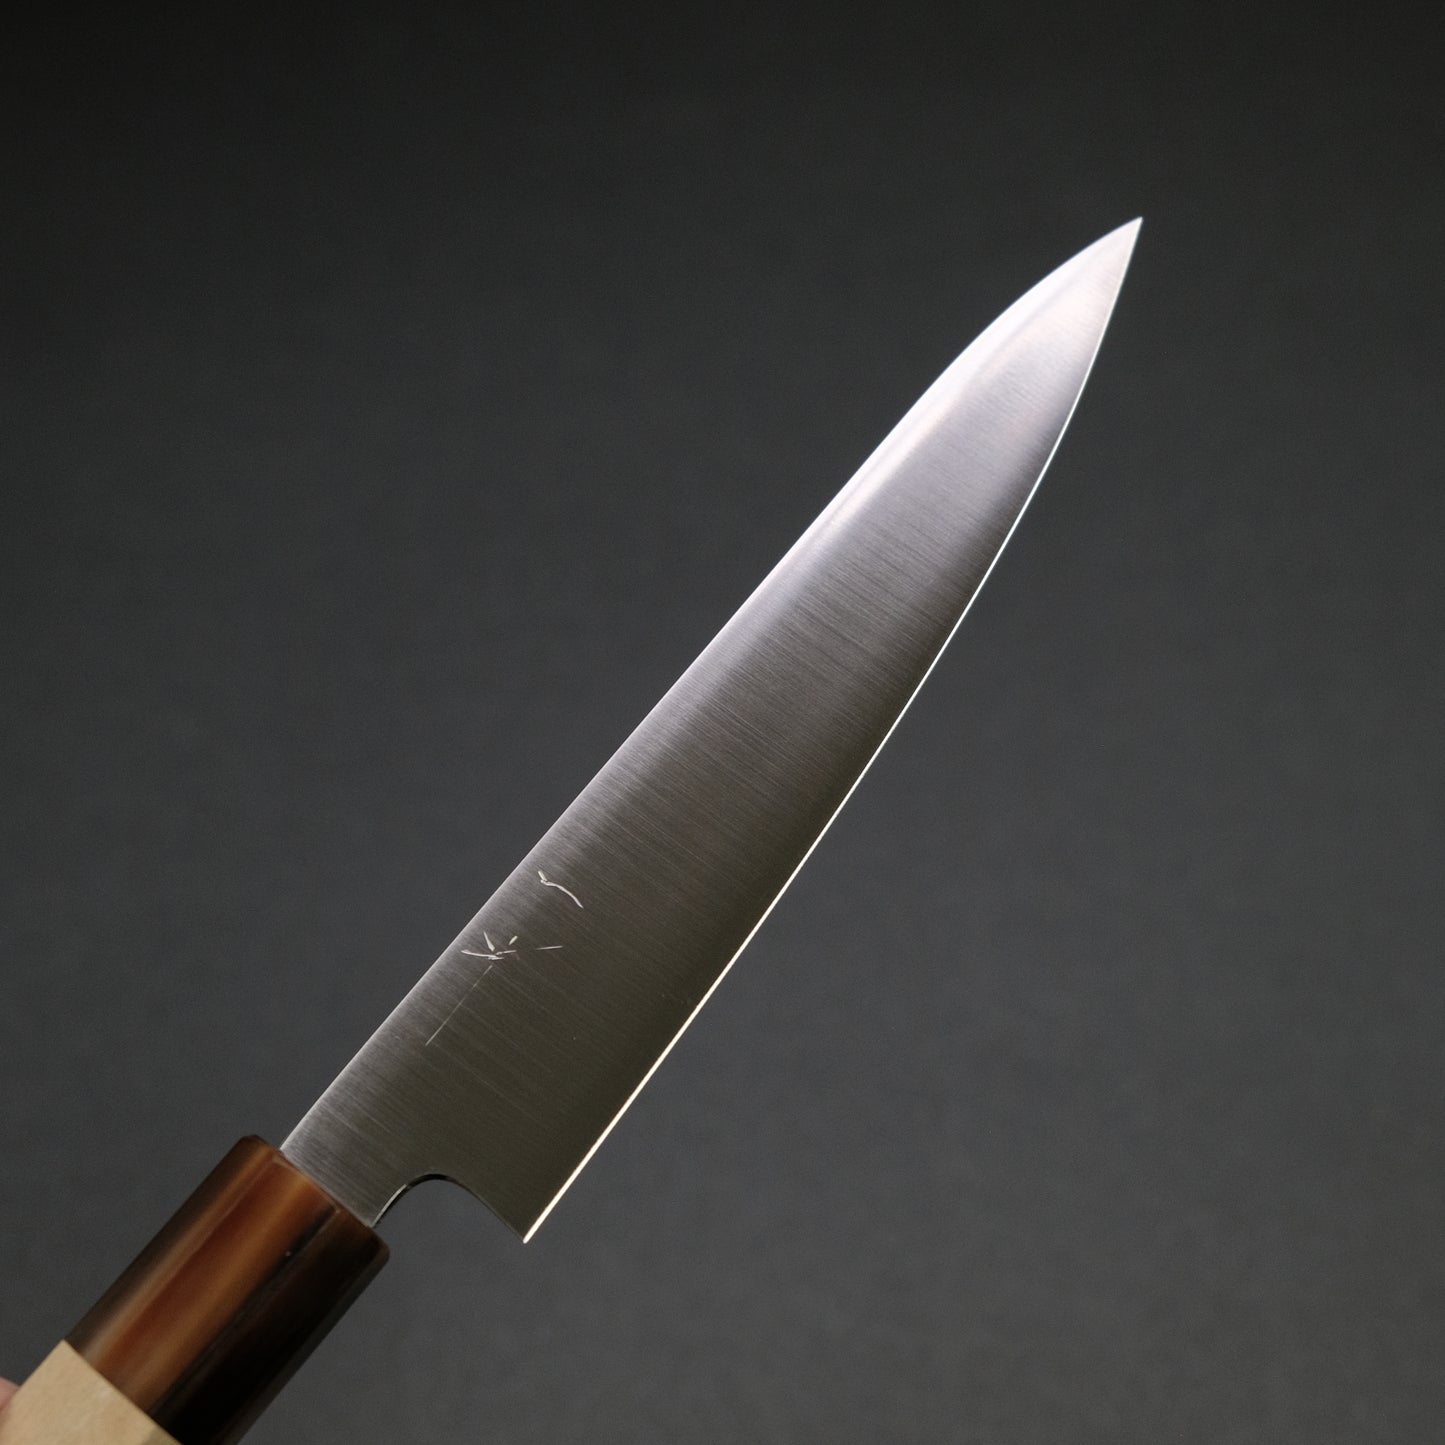 Hitohira SKR Stainless Petty 150mm Ho Wood Handle